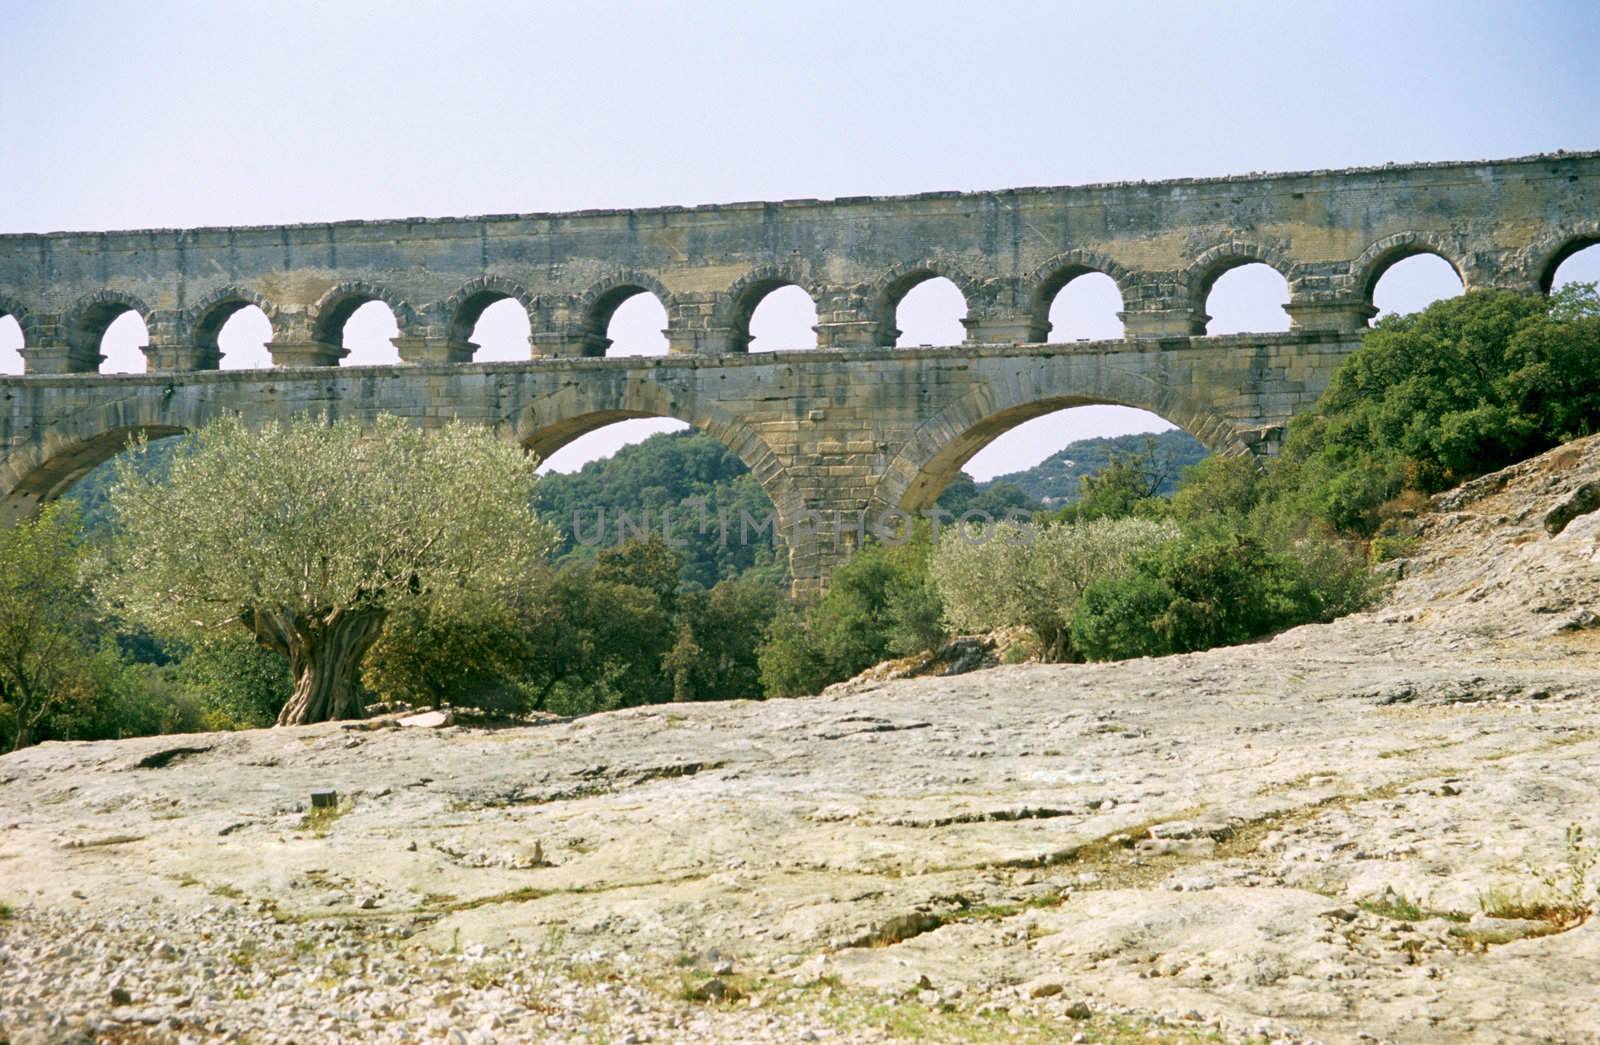 Remains of the Roman aqueduct, Pont Du Gard, near Nimes, France with an ancient olive tree.